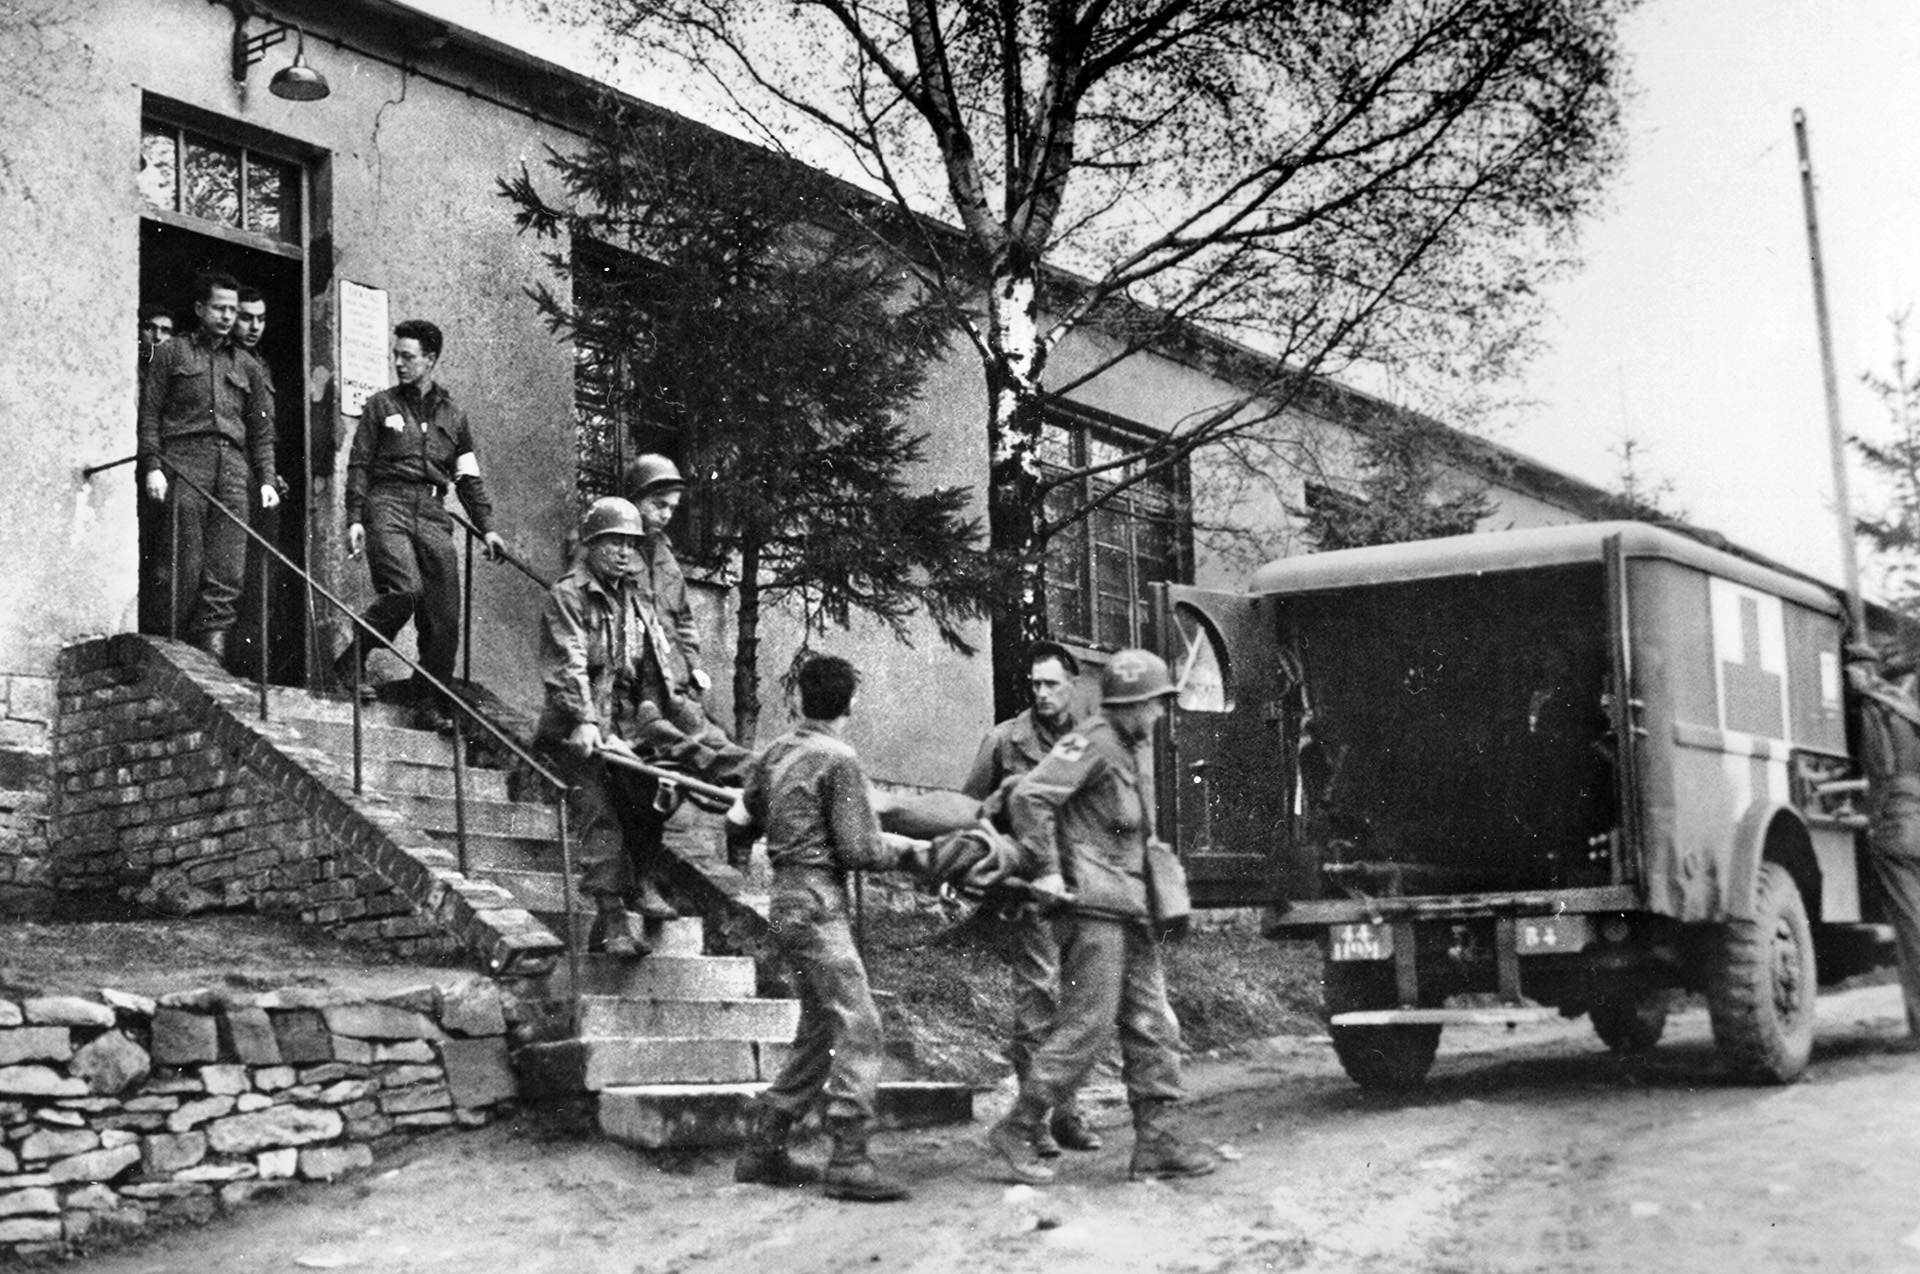 Once Stalag IX-B at Bad Orb was liberated in April 1945, many of the prisoners, on the verge of death, needed to be transported in ambulances to military hospitals to receive proper medical treatment.